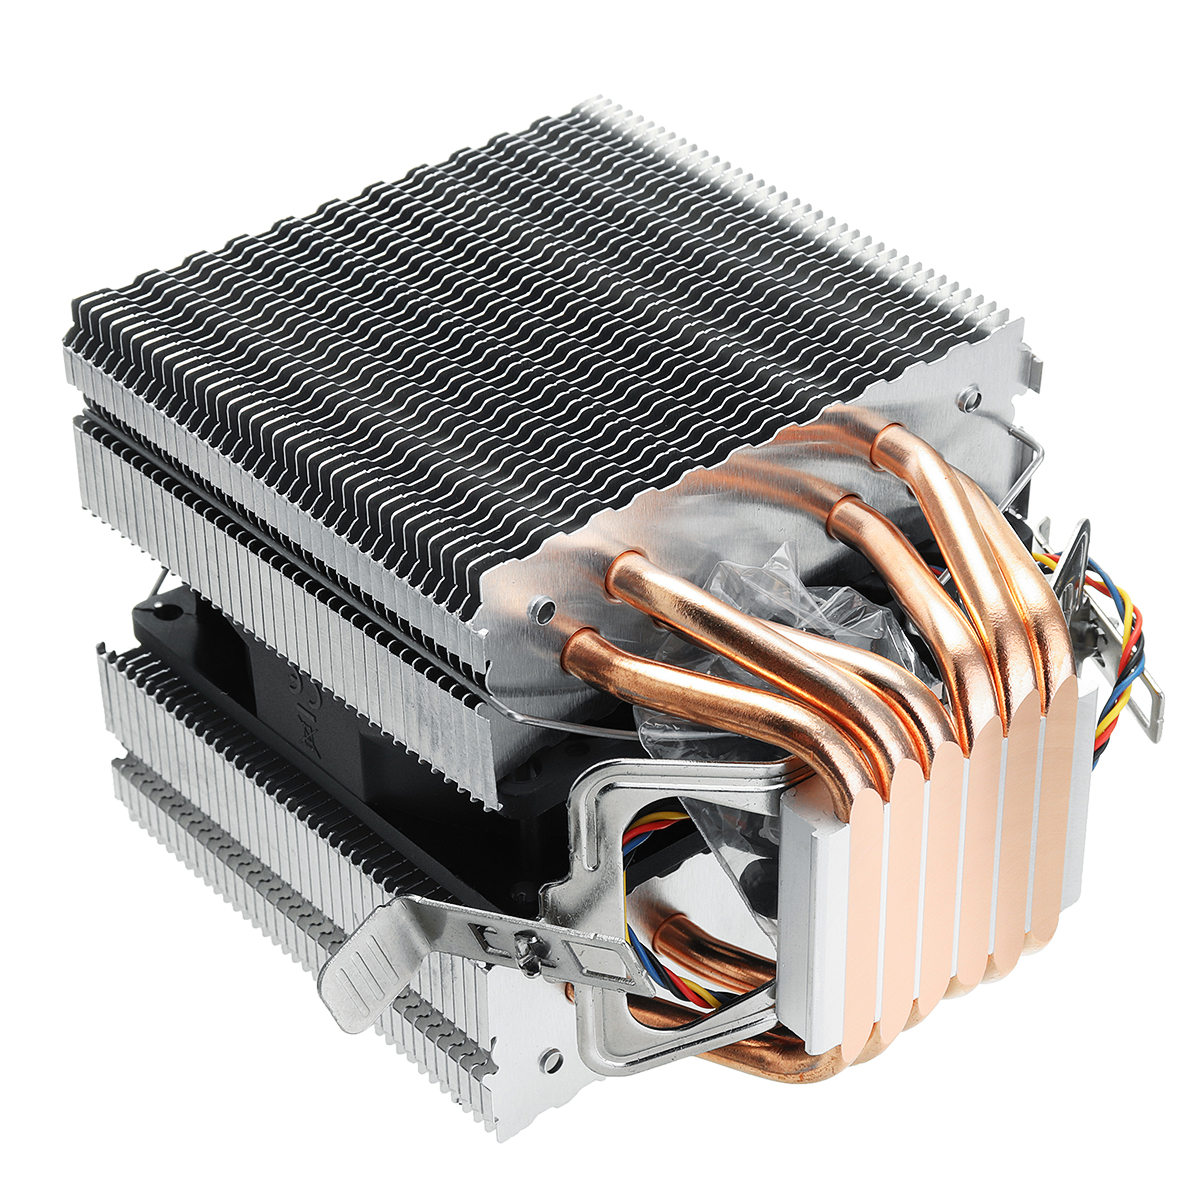 Dc12v 6 Heat Pipe Computer Cpu Fan Cooler Ultra Quiet Heat Sink For Lag1156 1155 1150 775